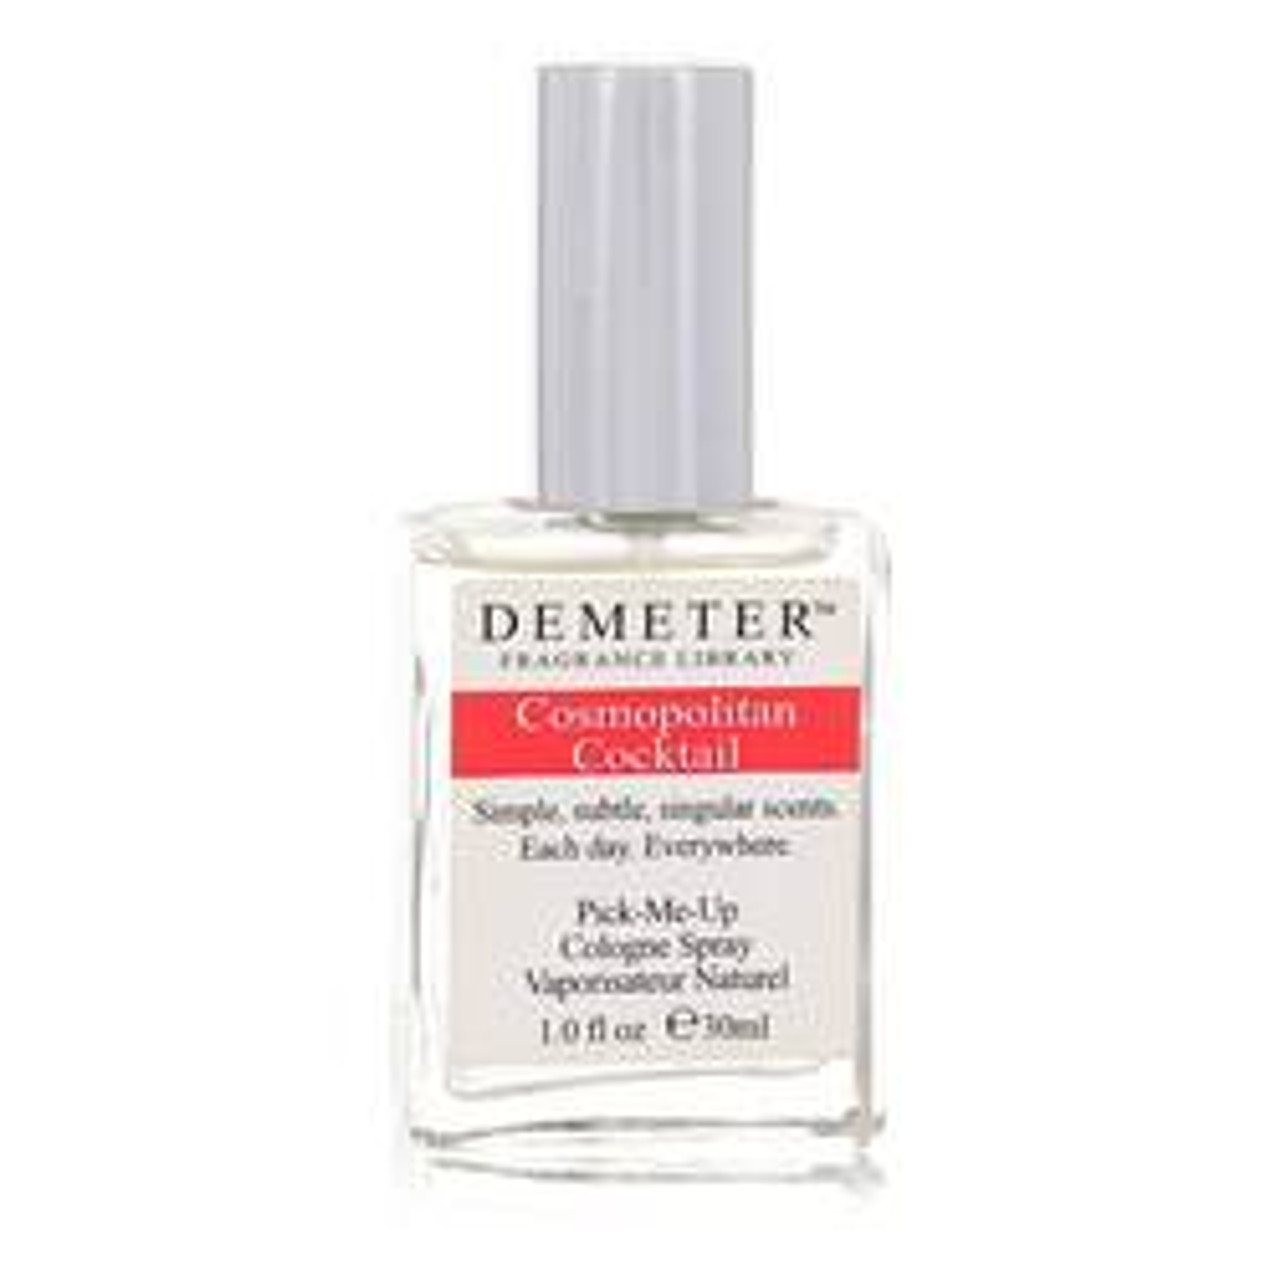 Demeter Cosmopolitan Cocktail Perfume By Demeter Cologne Spray 1 oz for Women - [From 31.00 - Choose pk Qty ] - *Ships from Miami